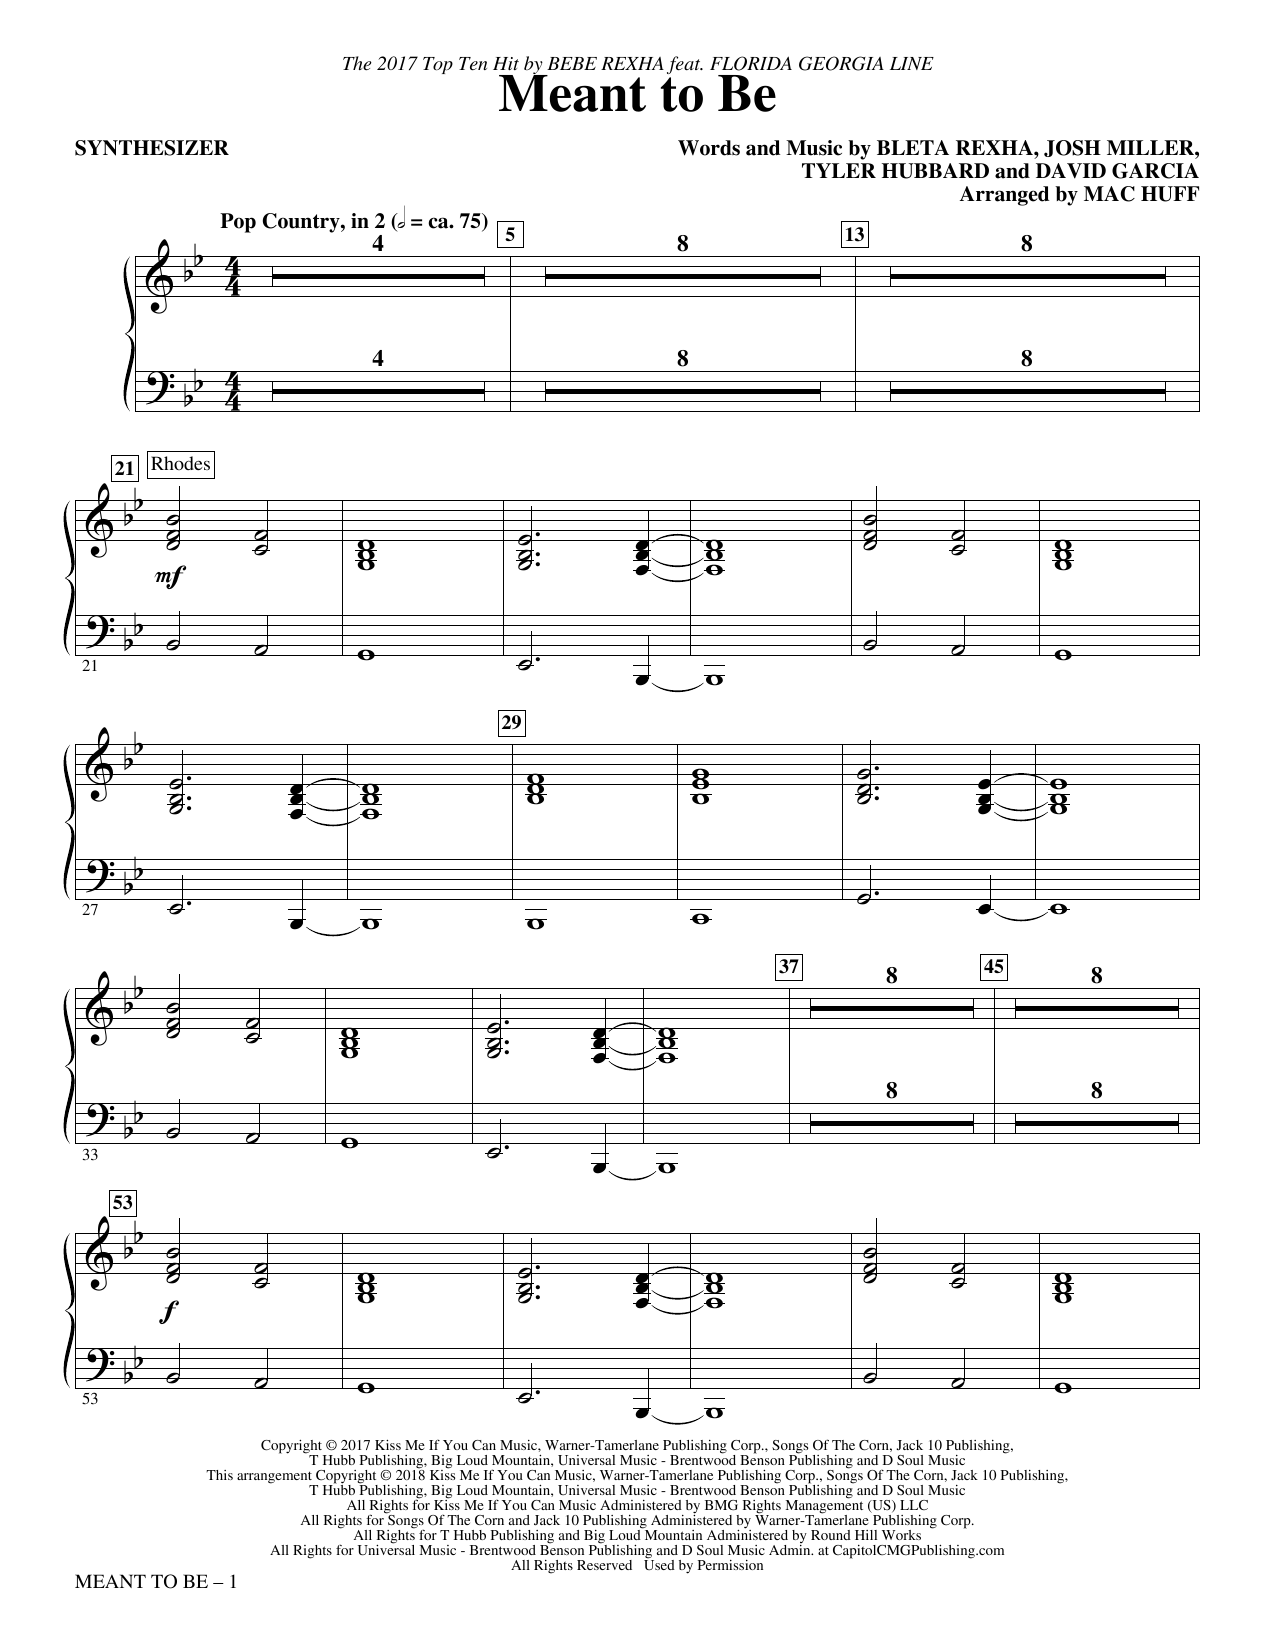 Meant to Be (Feat. Florida Georgia Line) (arr. Mac Huff) - Synthesizer sheet music